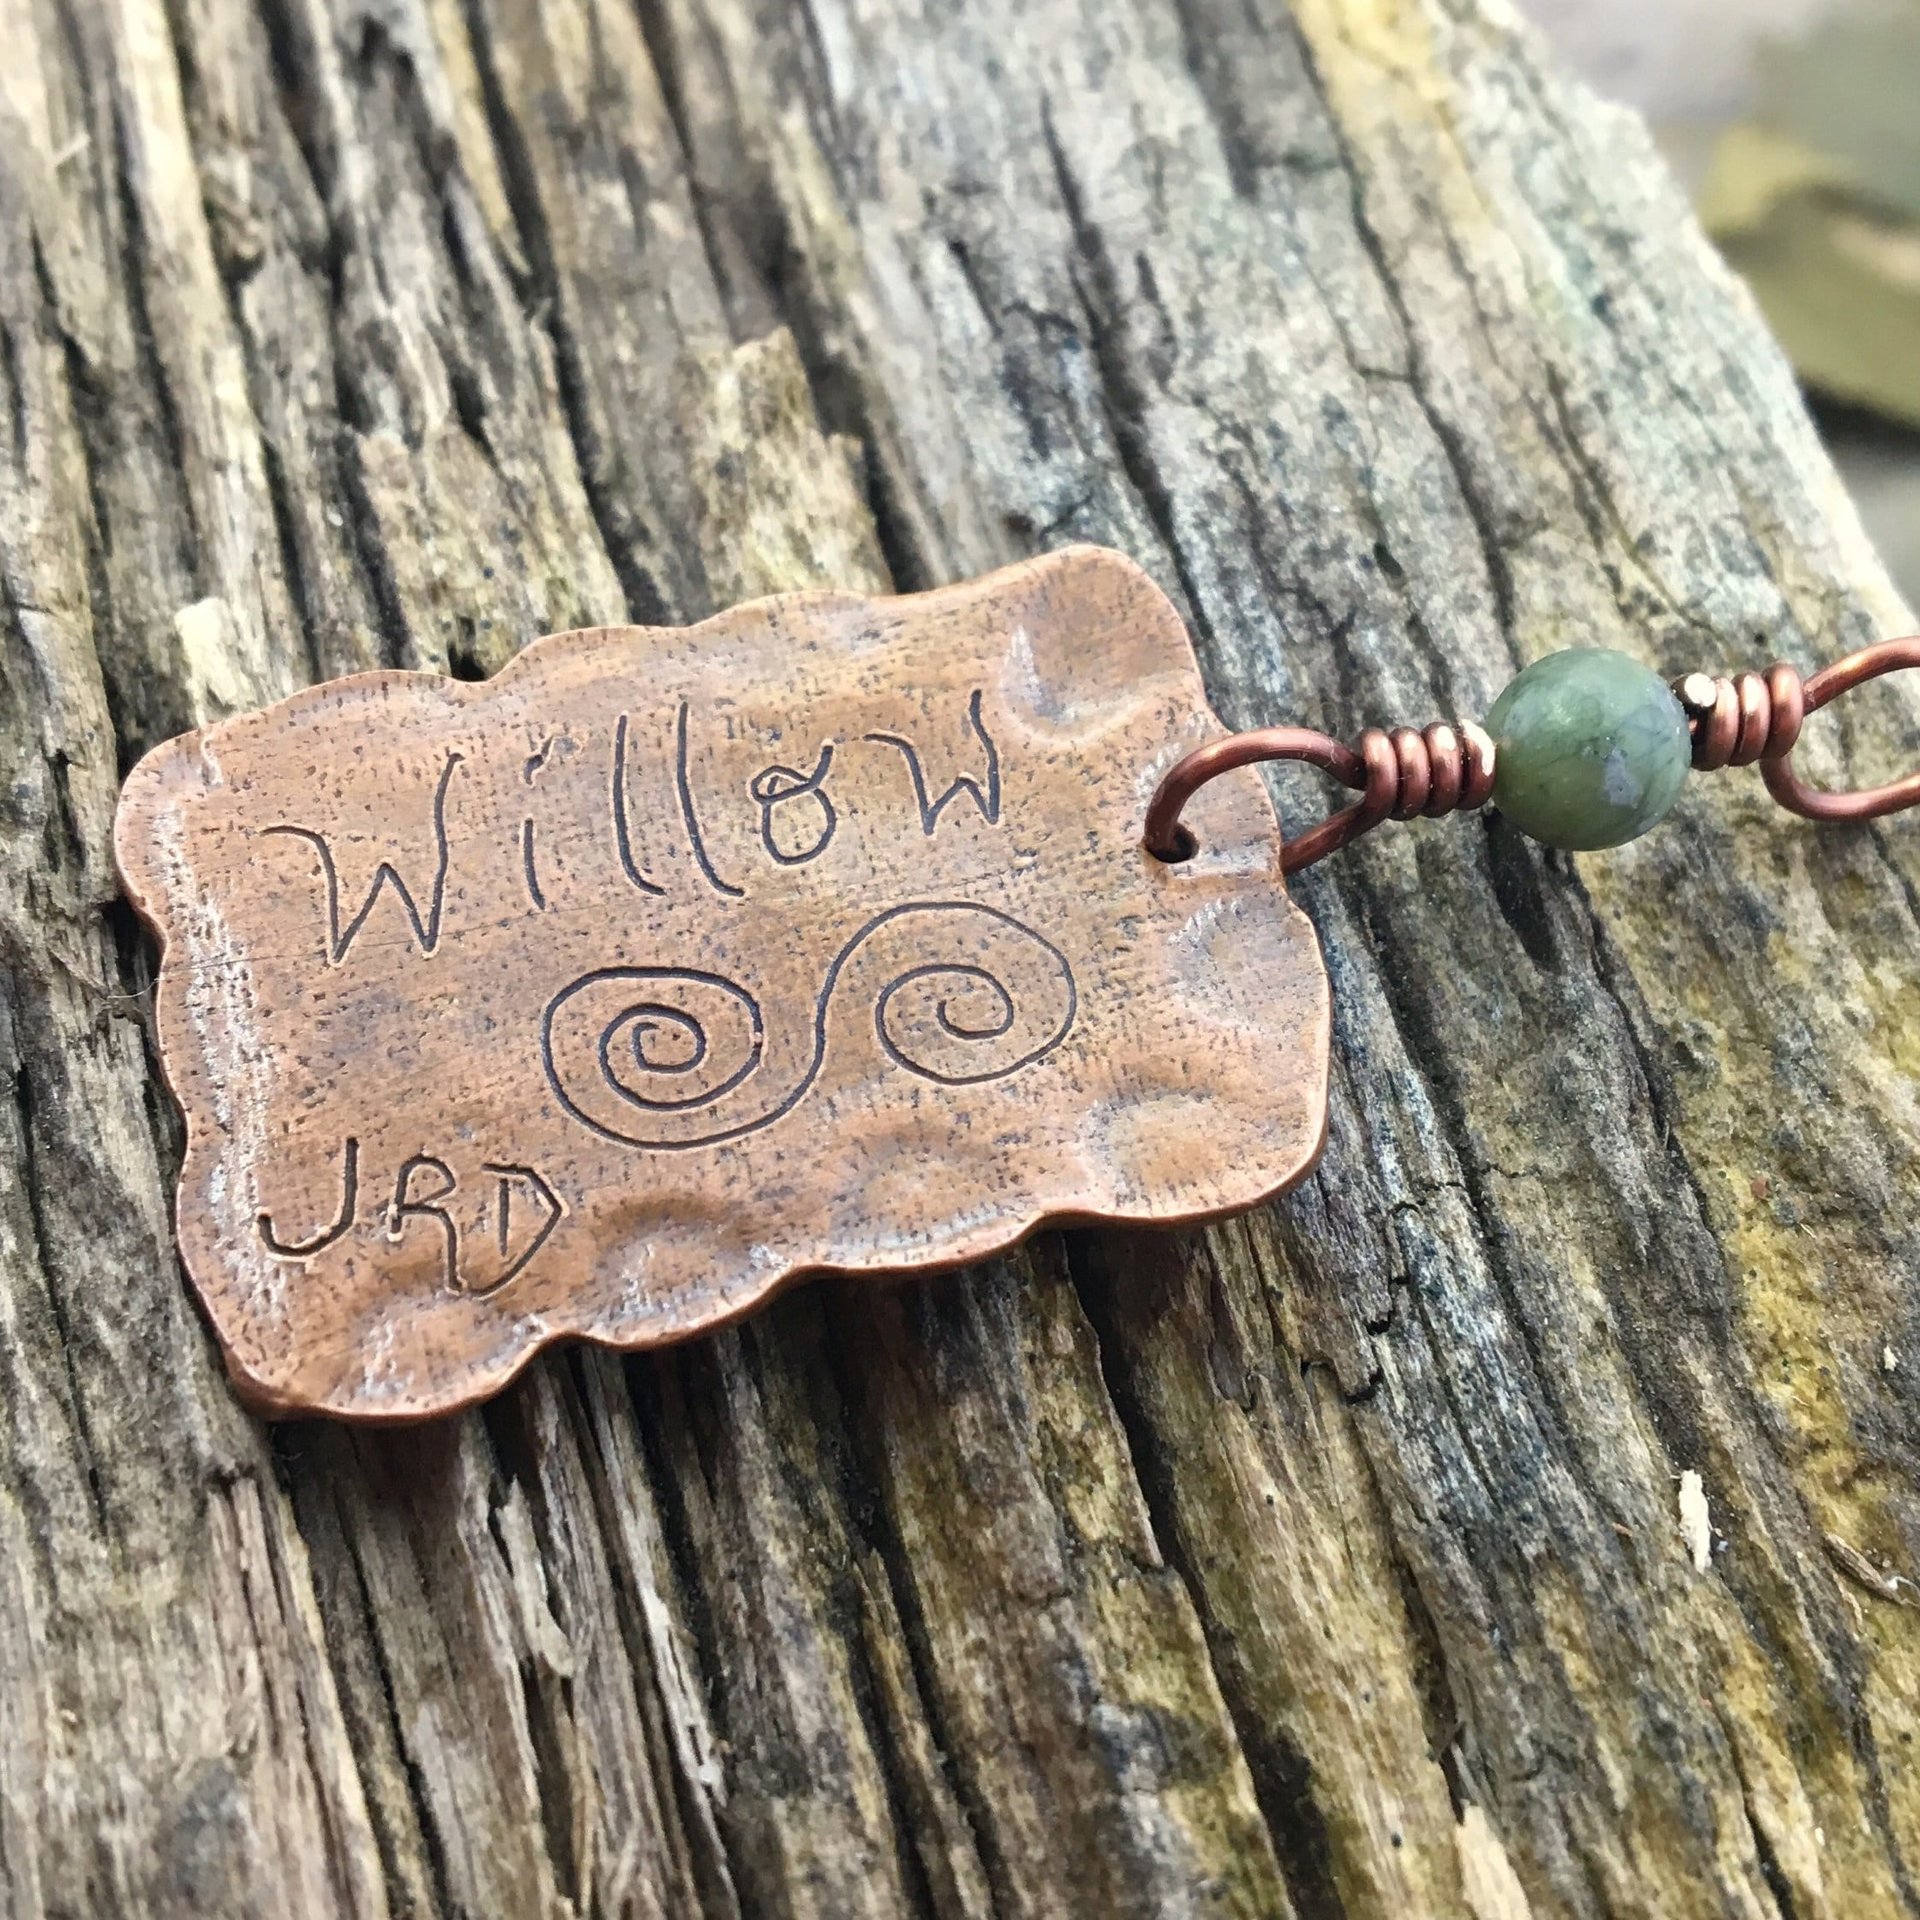 Willow Tree Ogham Charm, Copper Pendant, Celtic Tree Astrology, Connemara Marble, Hand Carved Art, Irish Gaelic, Spirals,  April 15 – May 12